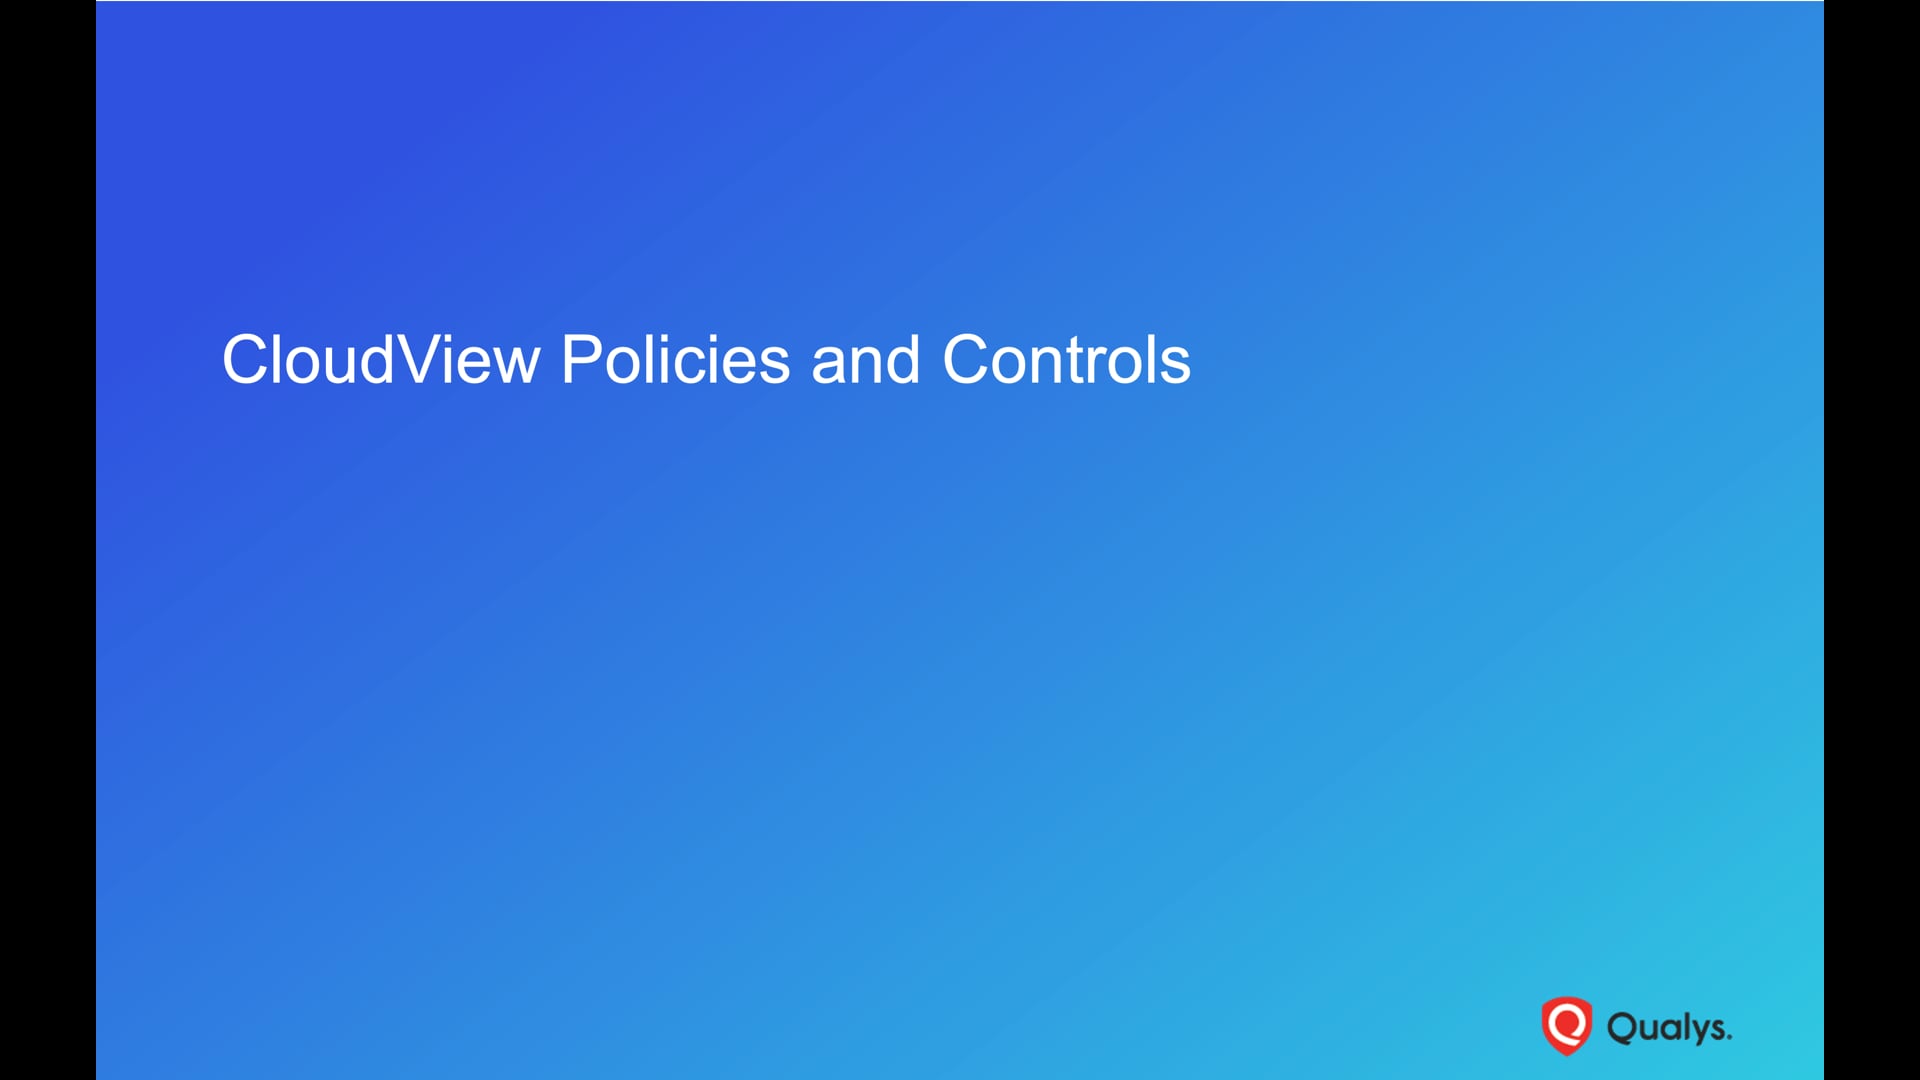 CloudView Policies and Controls